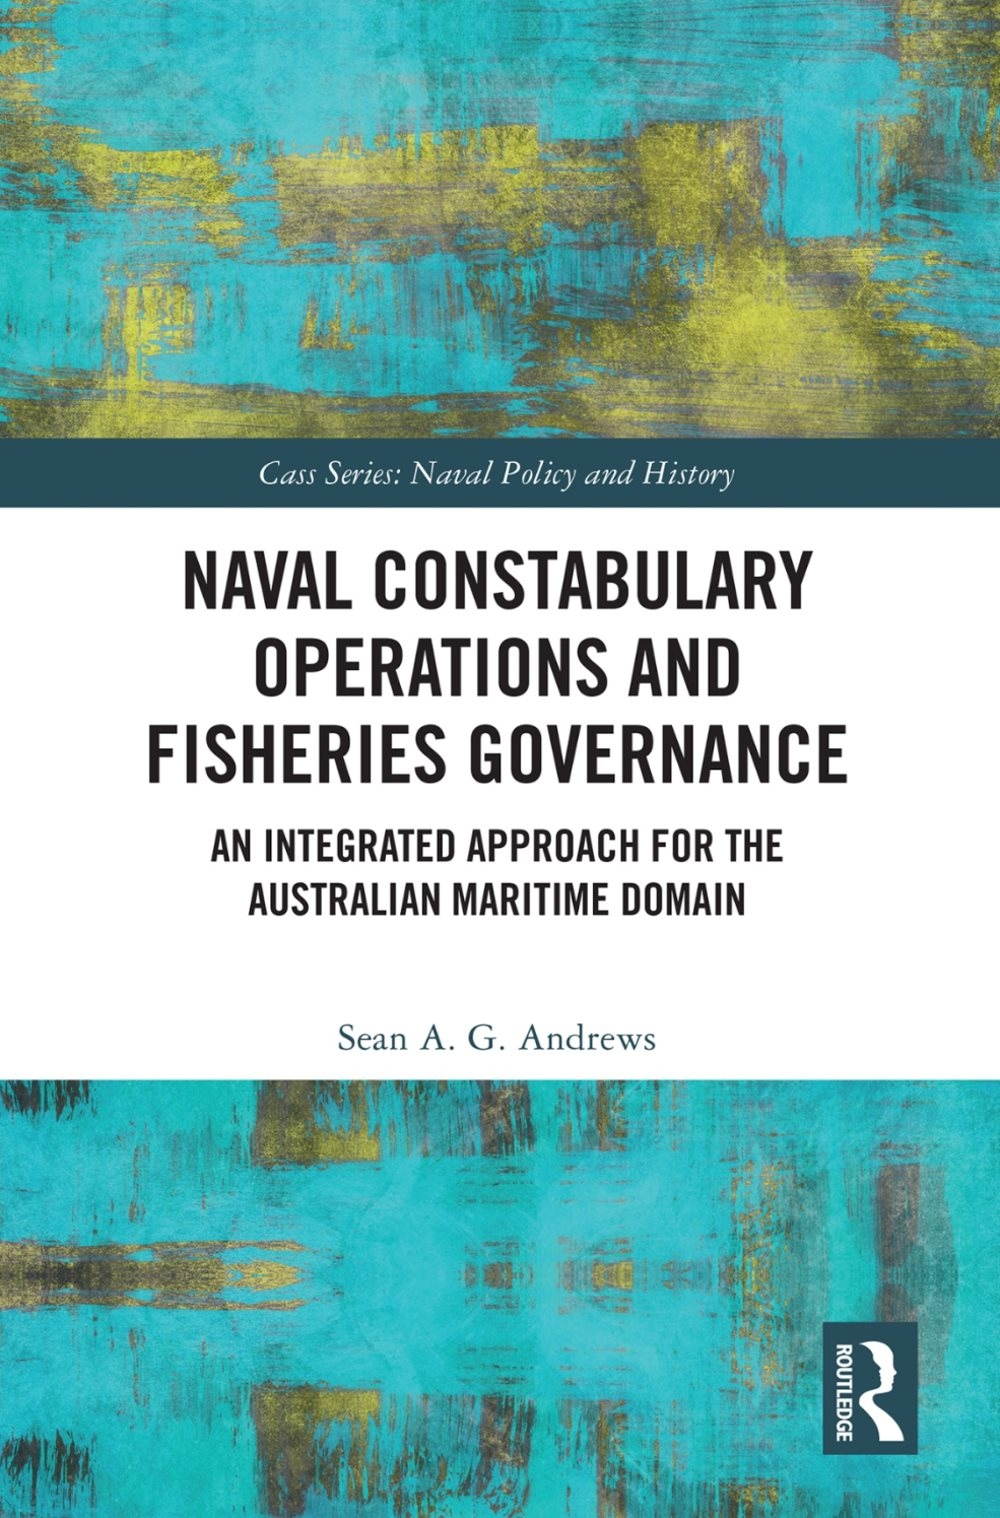 Naval Constabulary Operations and Fisheries Governance: An Integrated Approach for the Australian Maritime Domain